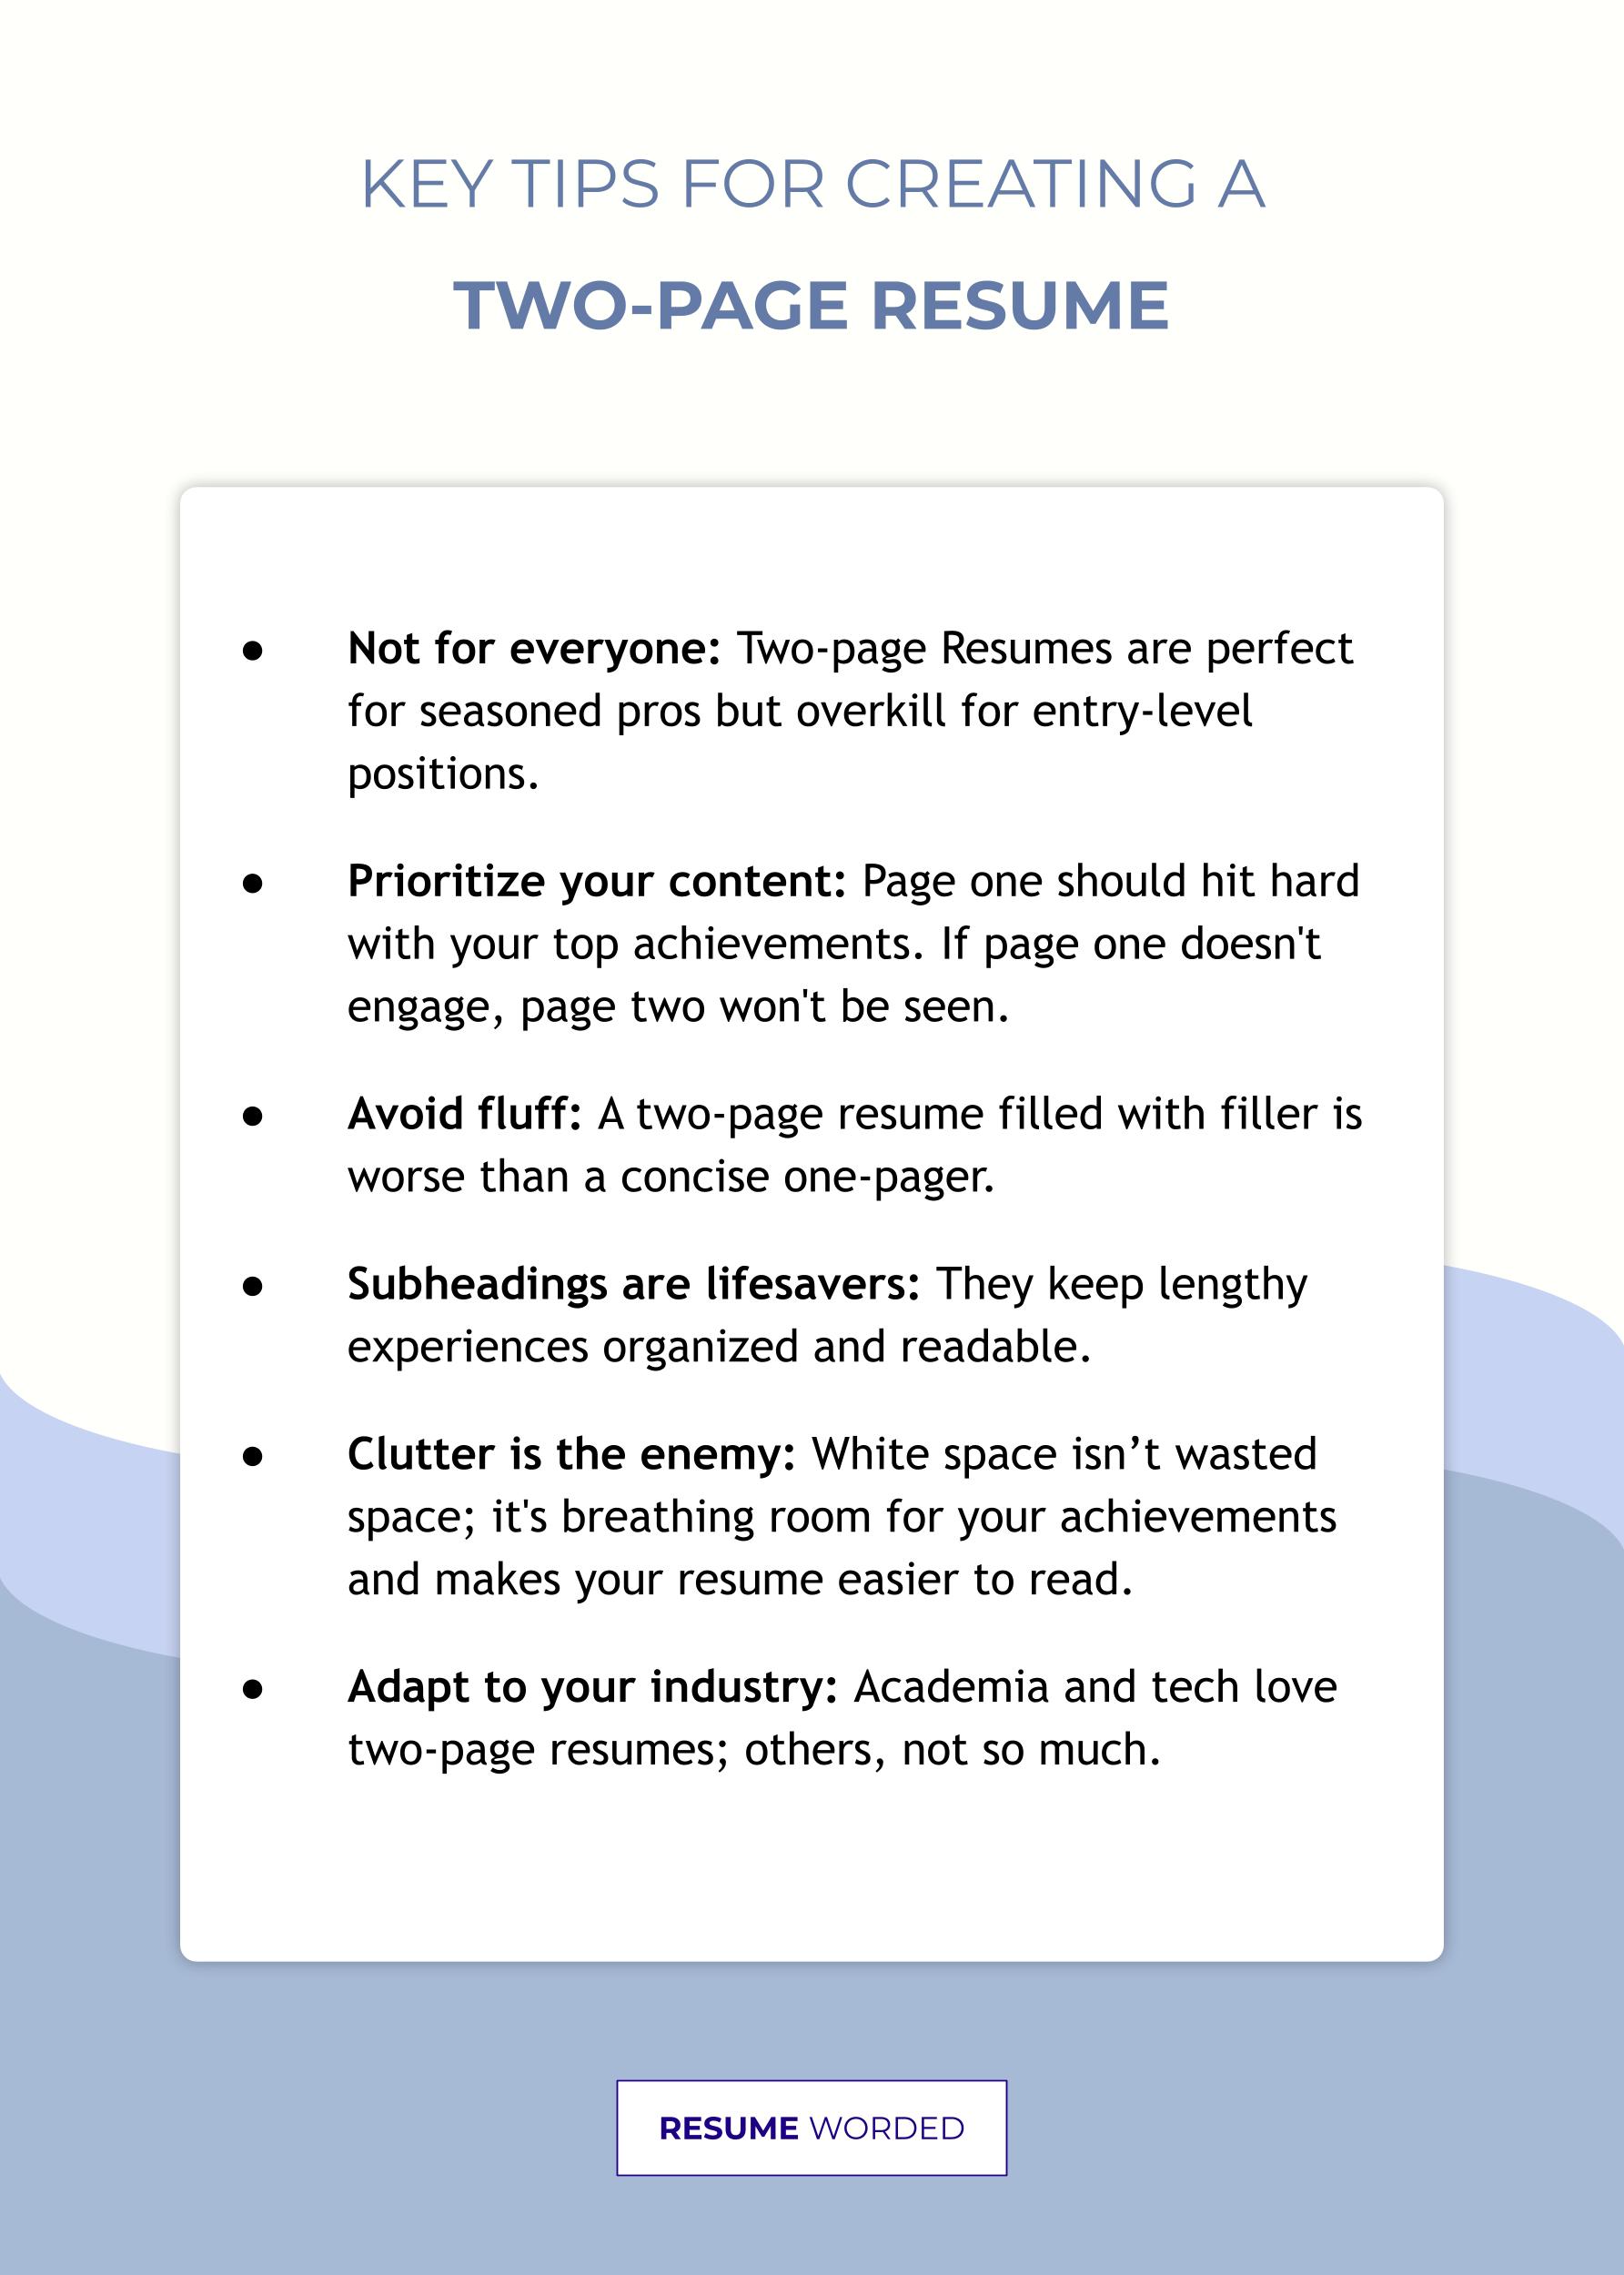 Key tips on creating and formatting a two-page resume